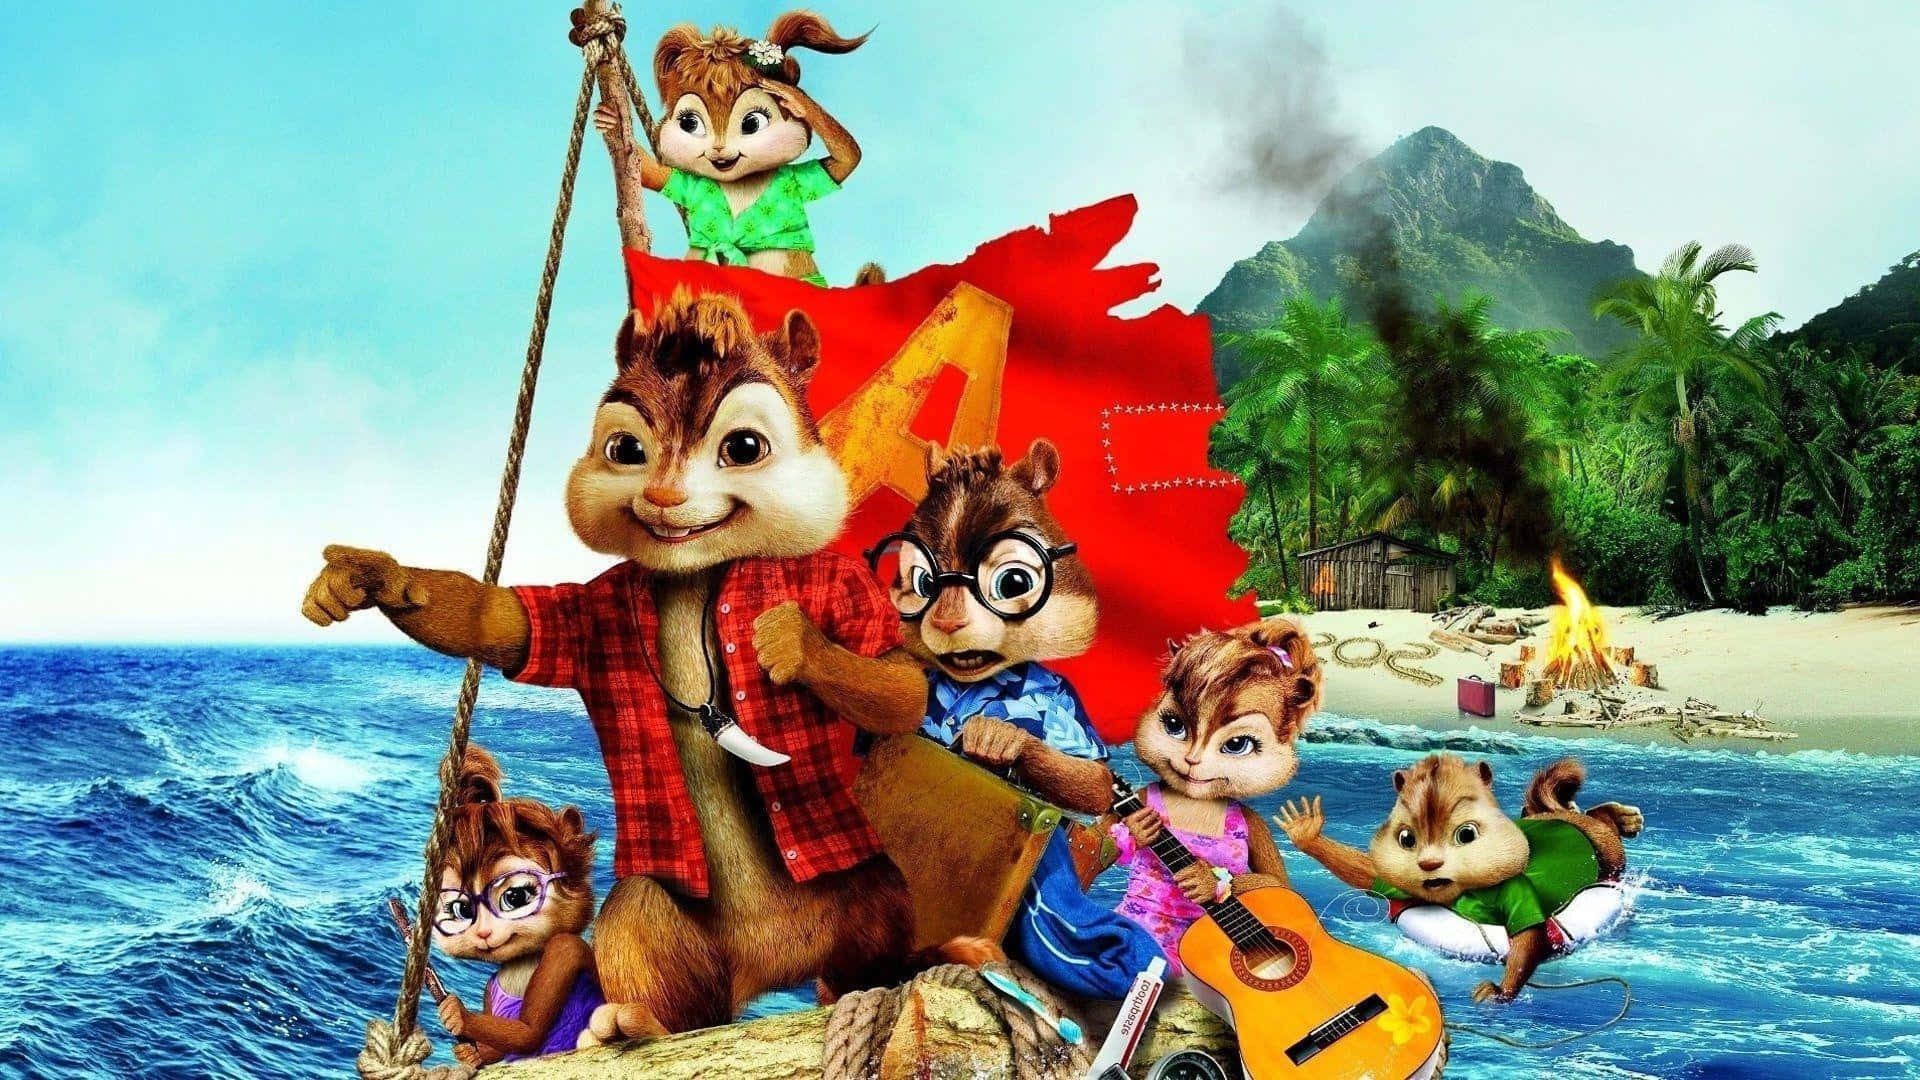 Fun Times with Alvin and The Chipmunks